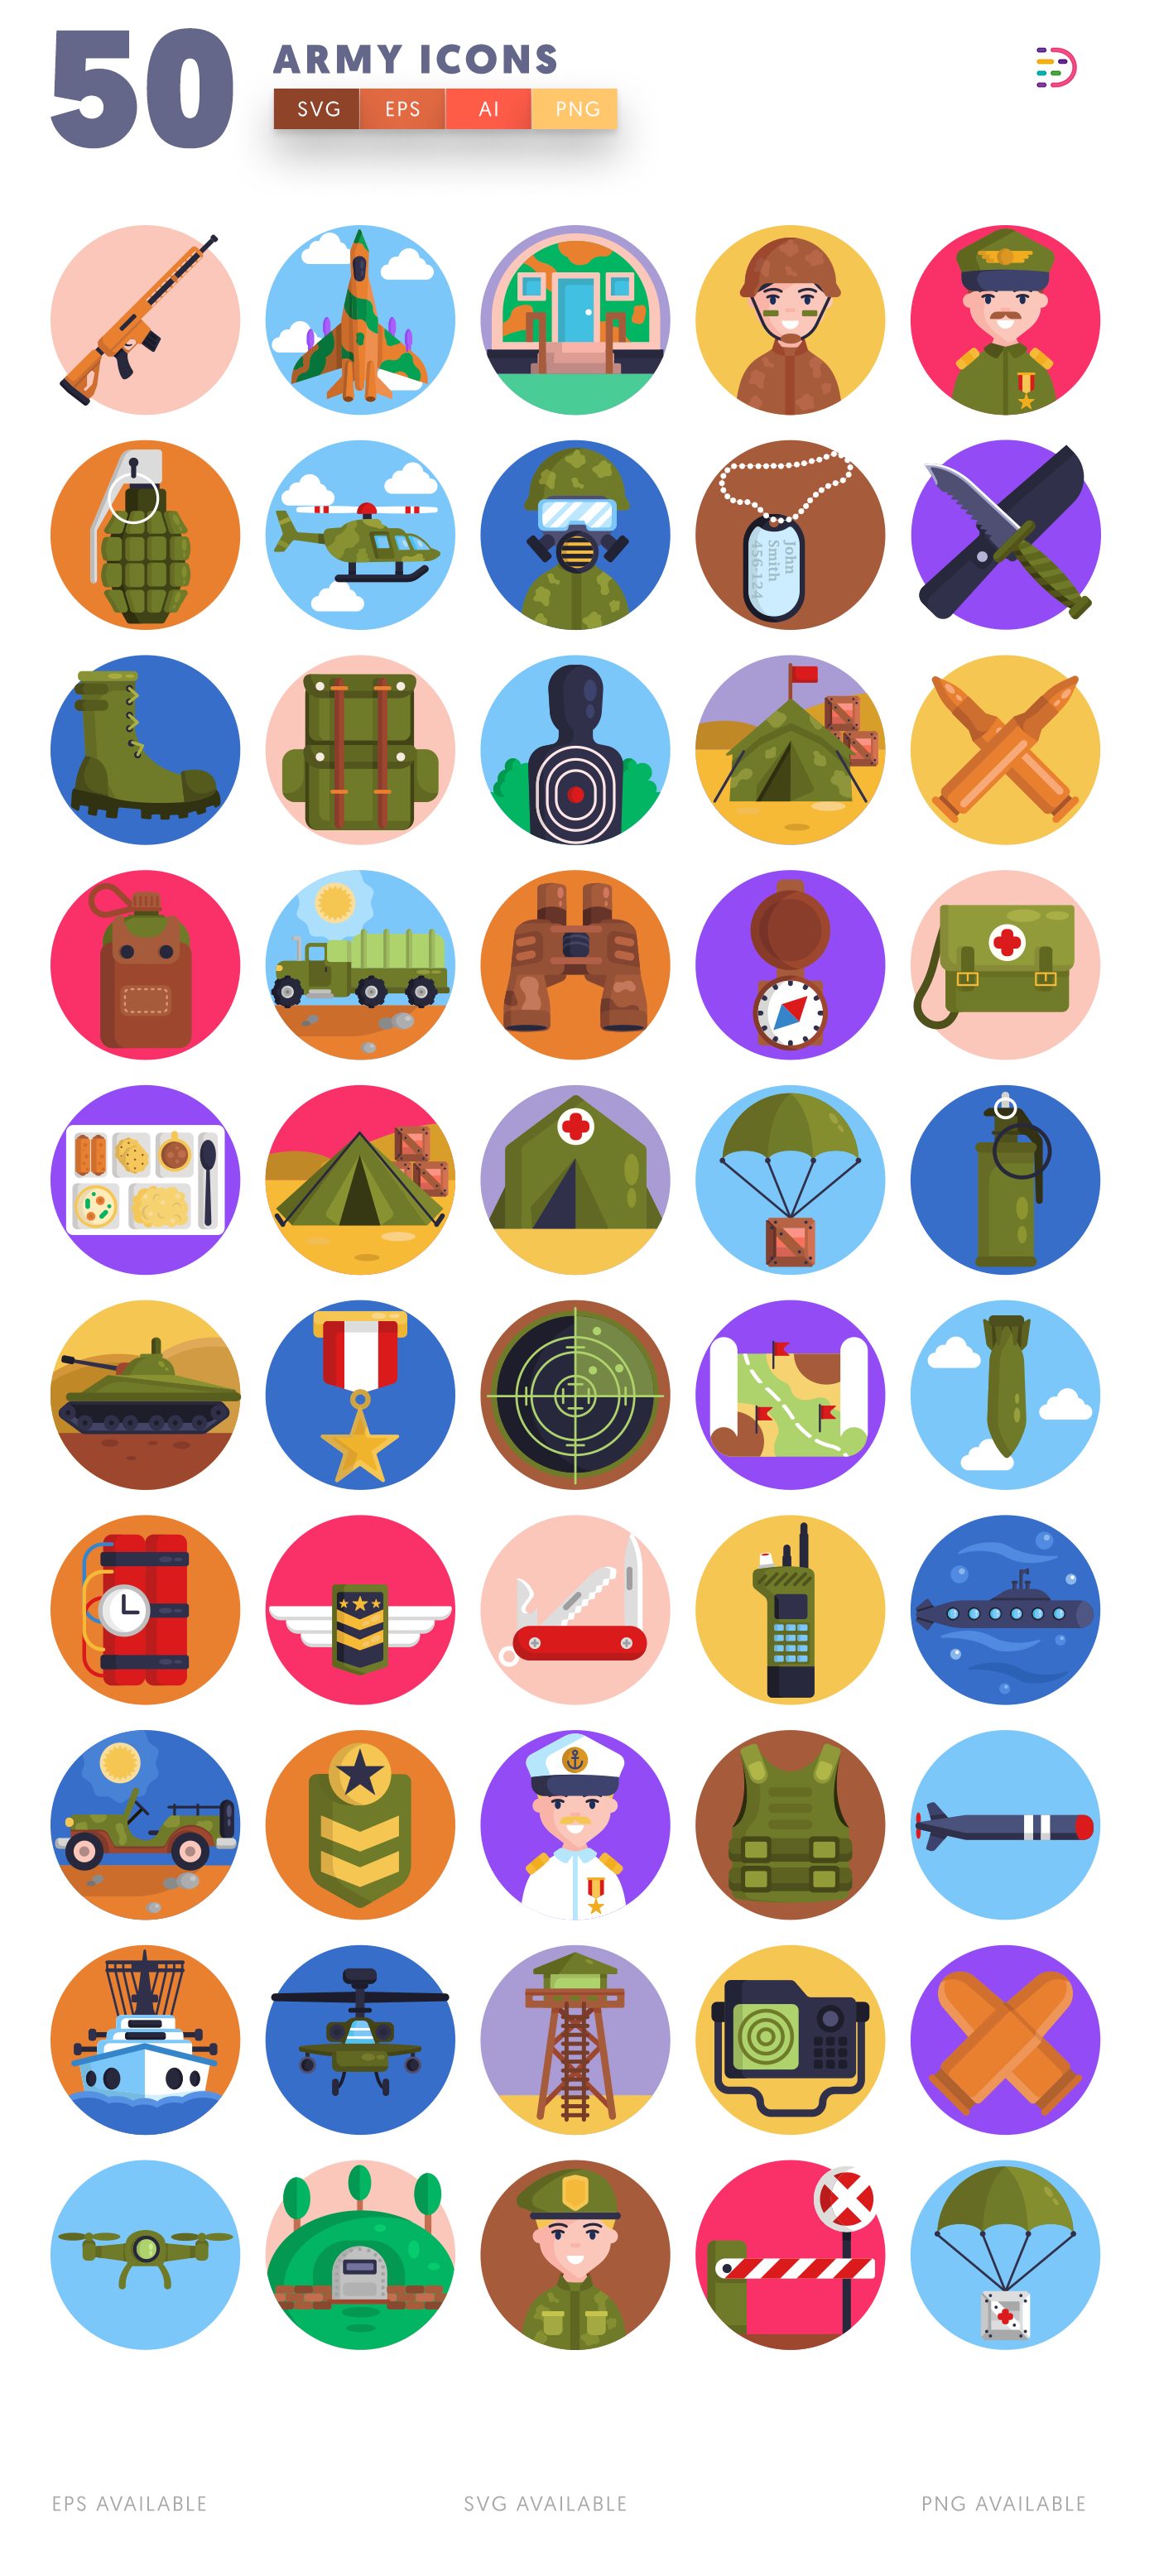 Army icon pack